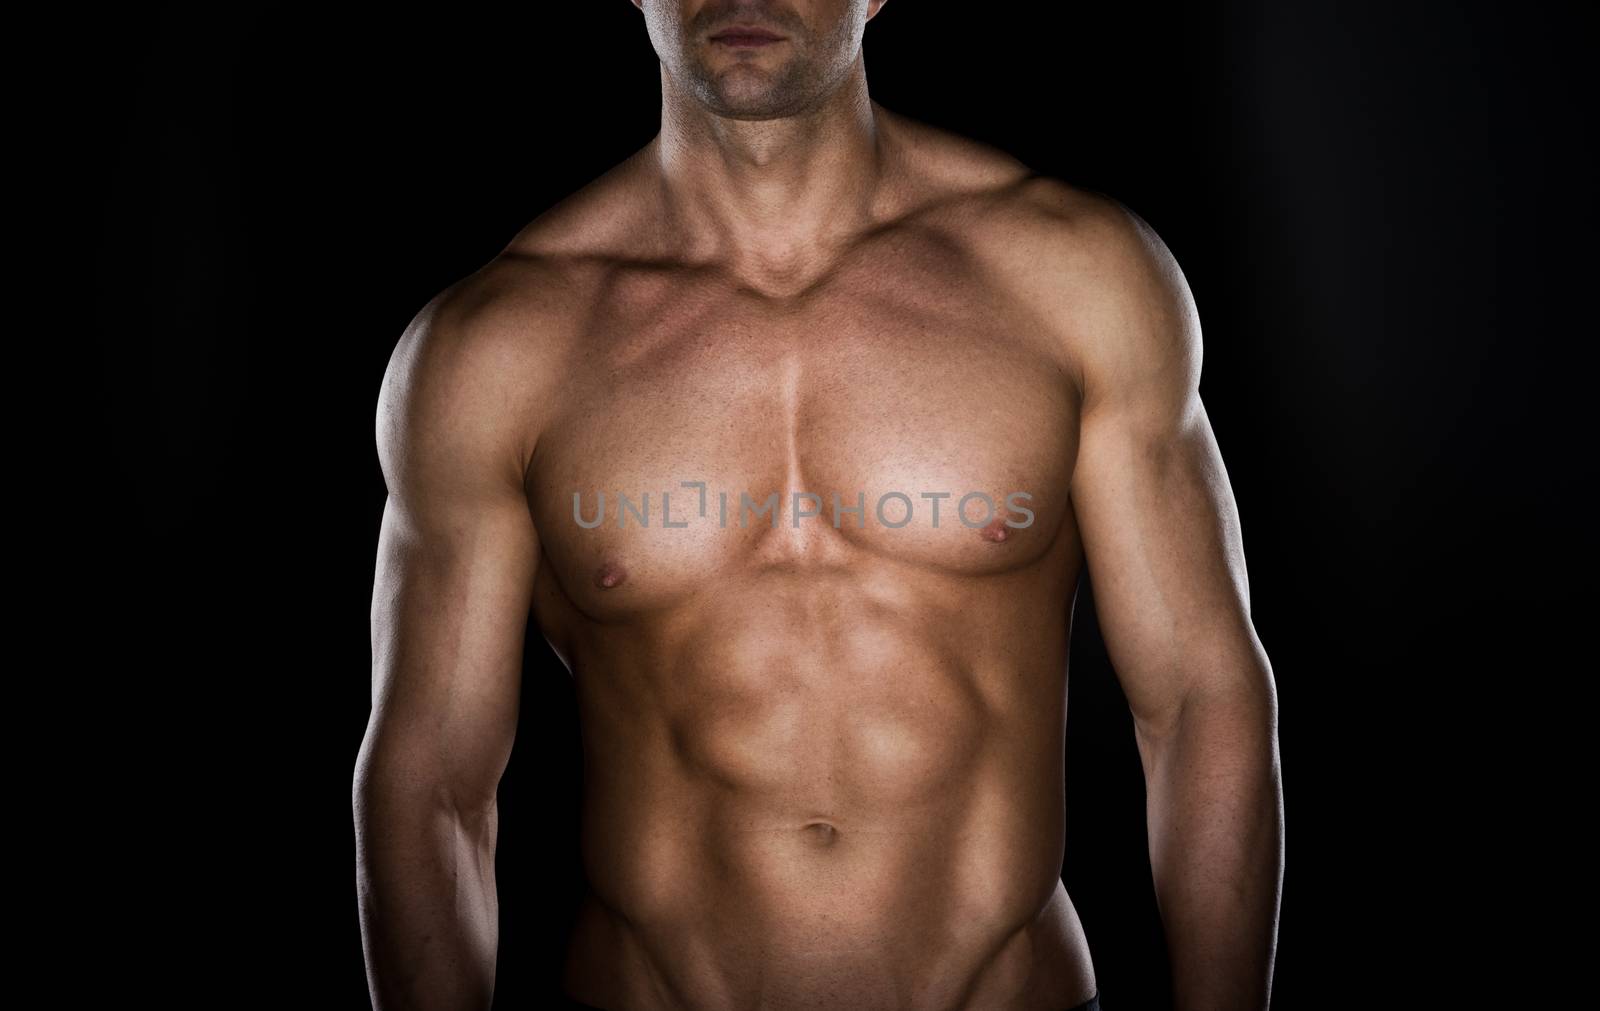 Bare chested muscular man looking down on dark background.